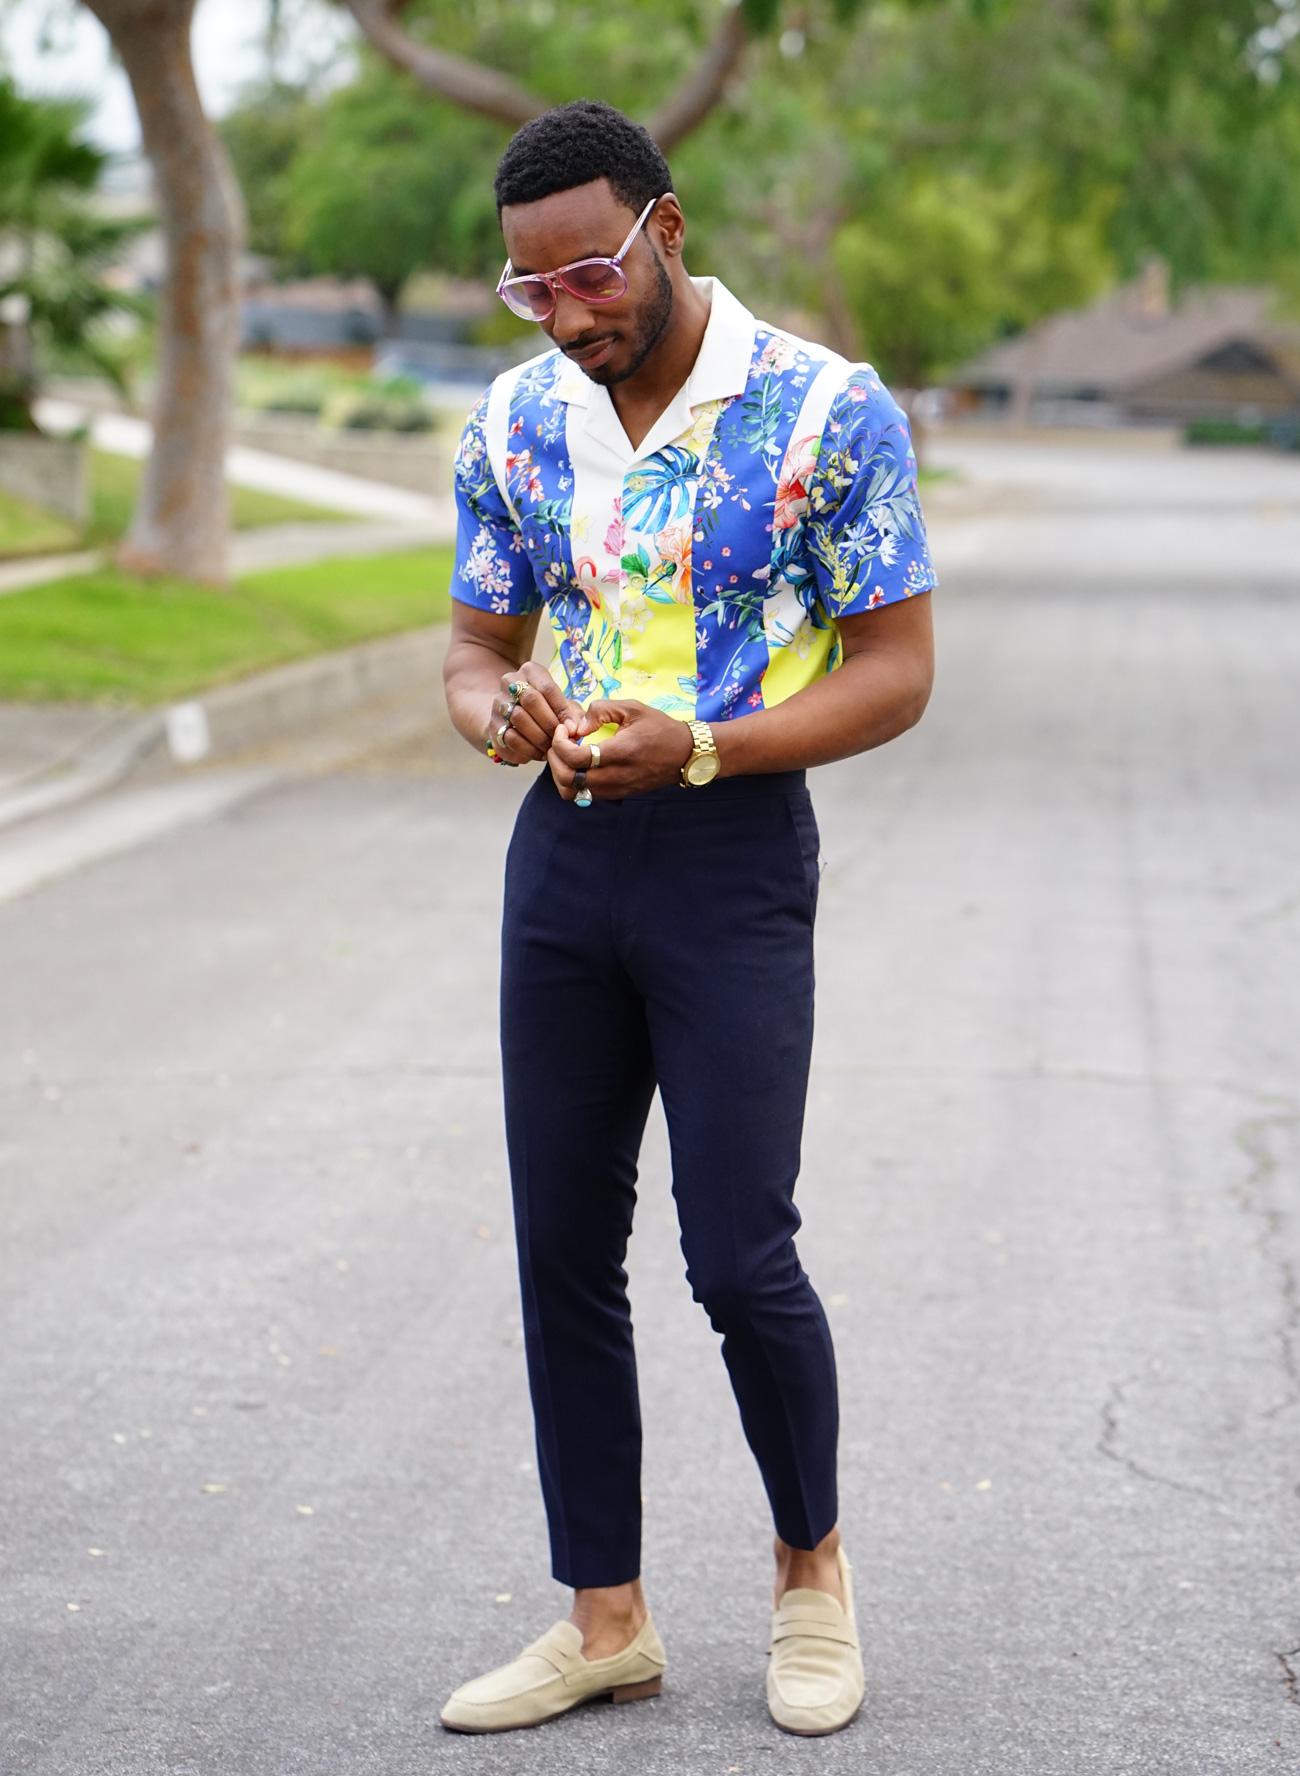 FLORAL BOWLING SHIRT RESTYLED IN CASUALWEAR – Norris Danta Ford